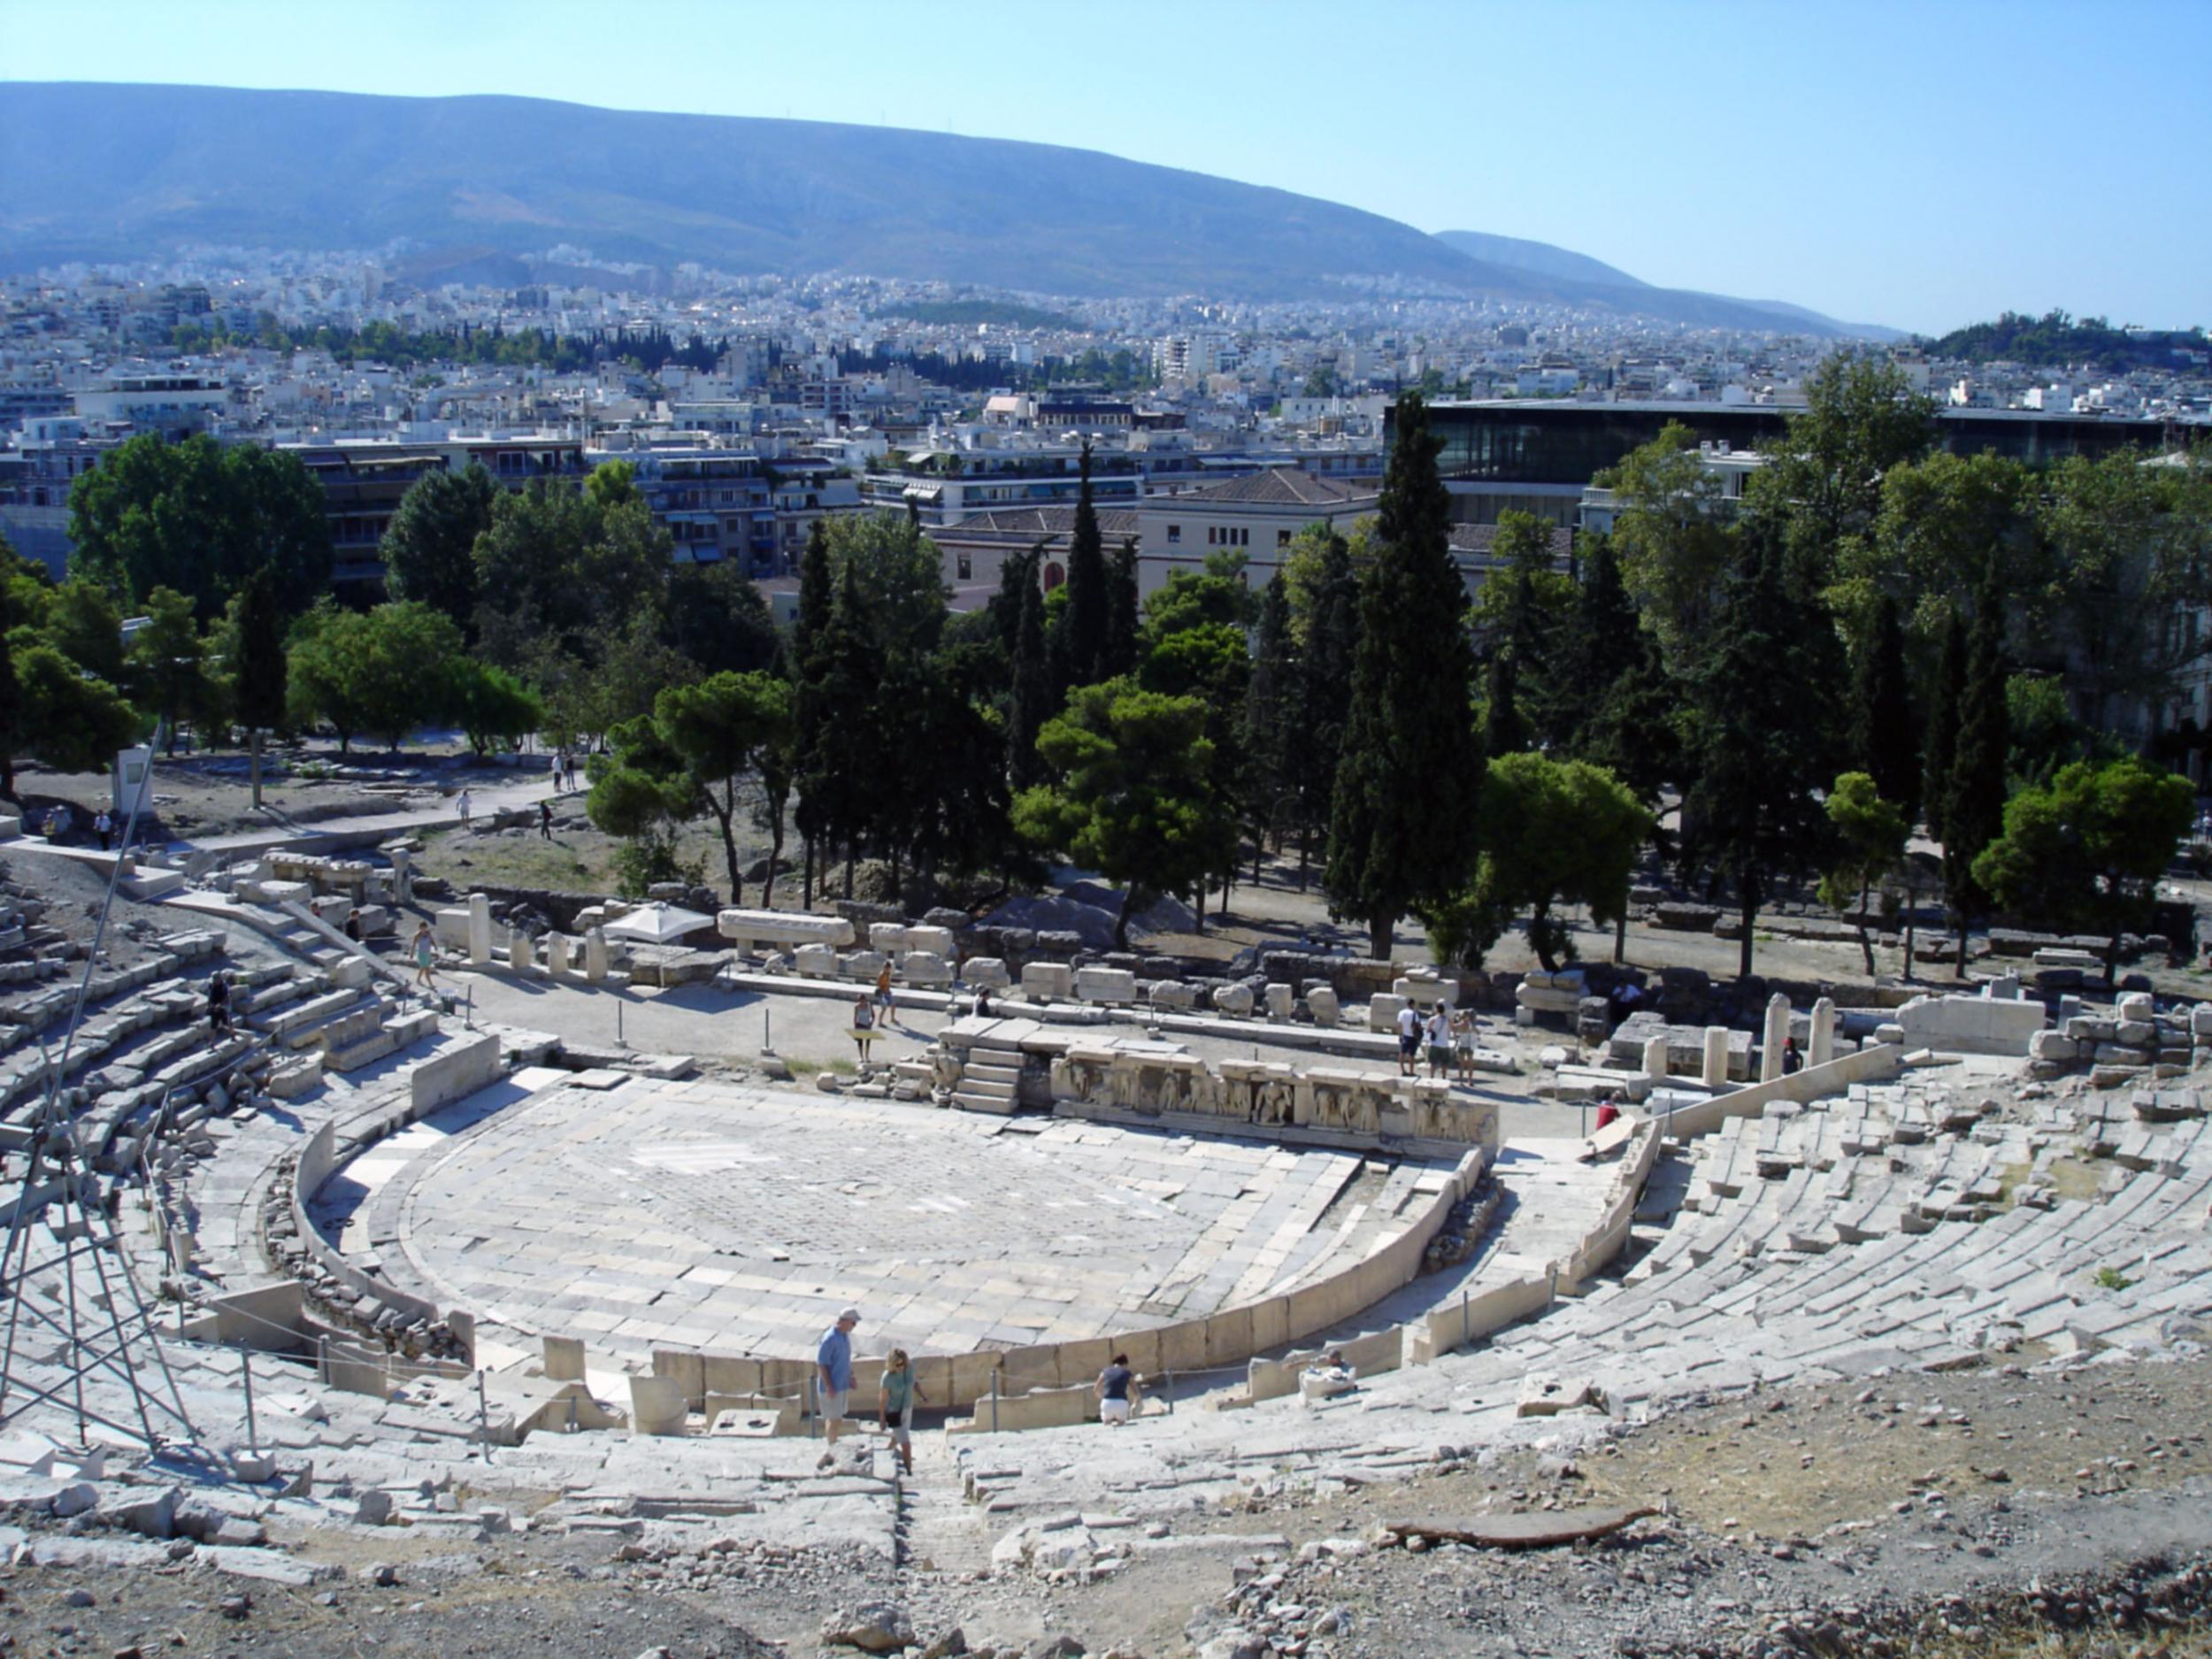 The Theatre of Dionysus is dedicated to the Greek god of drama and wine